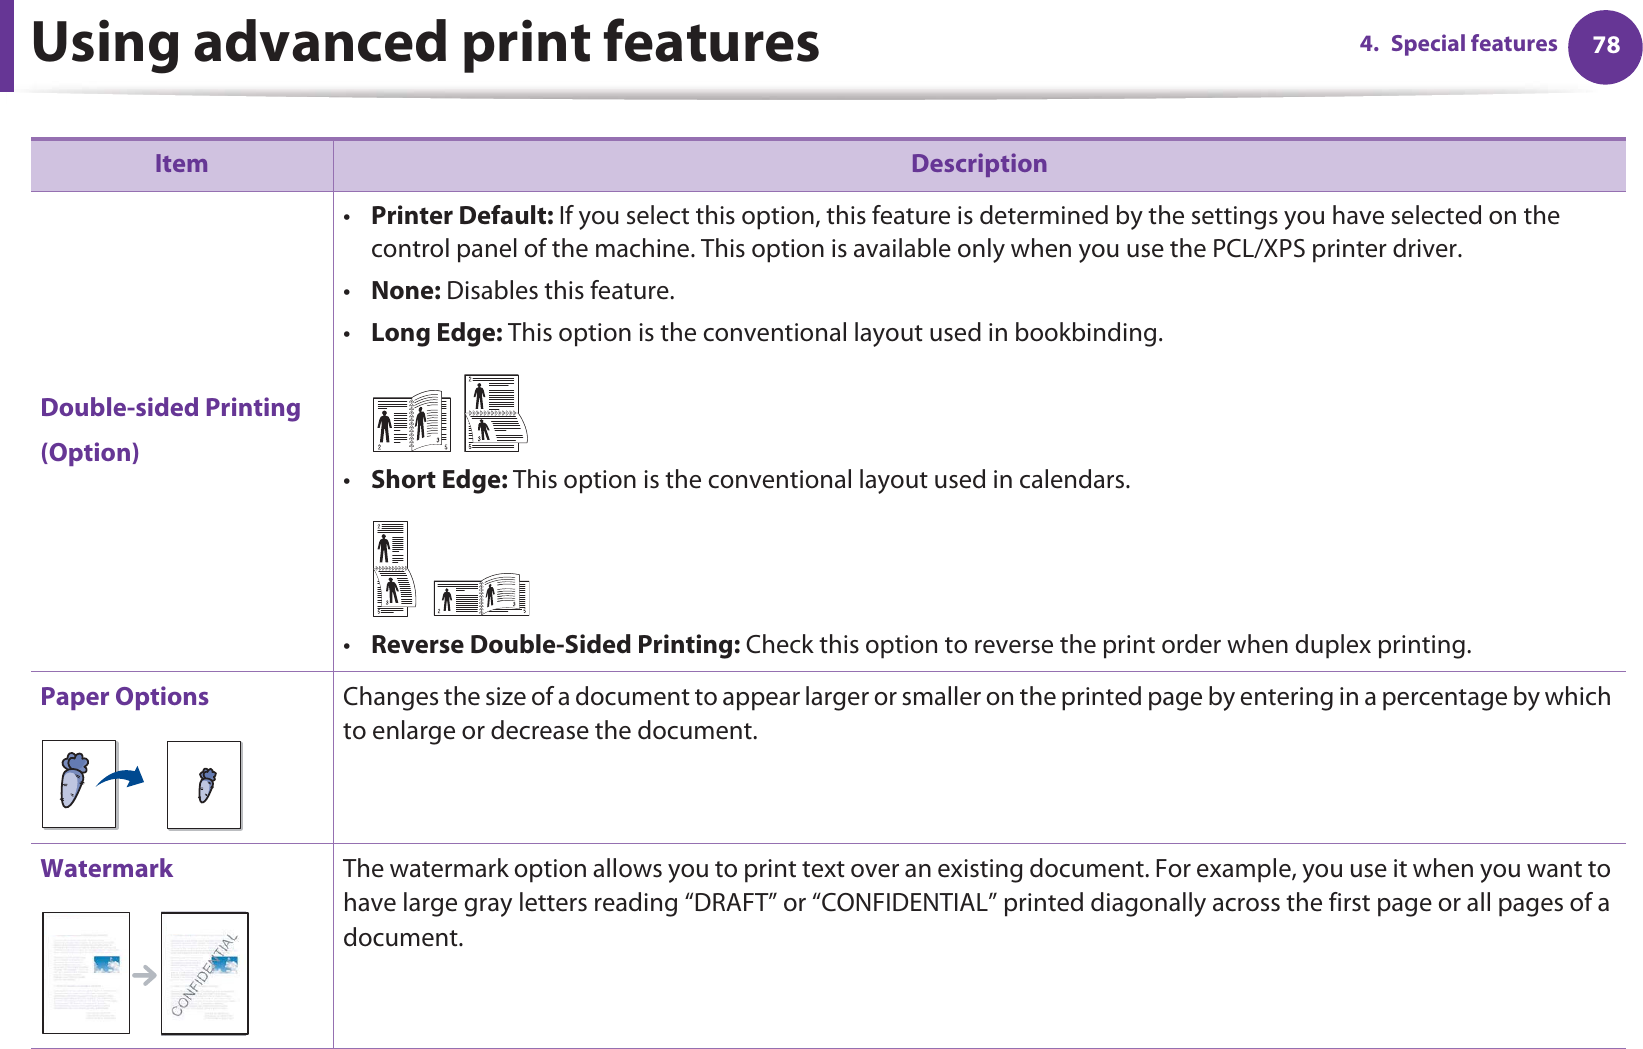 Using advanced print features 784. Special featuresDouble-sided Printing(Option)•Printer Default: If you select this option, this feature is determined by the settings you have selected on the control panel of the machine. This option is available only when you use the PCL/XPS printer driver.•None: Disables this feature.•Long Edge: This option is the conventional layout used in bookbinding.•Short Edge: This option is the conventional layout used in calendars.•Reverse Double-Sided Printing: Check this option to reverse the print order when duplex printing.Paper Options Changes the size of a document to appear larger or smaller on the printed page by entering in a percentage by which to enlarge or decrease the document.Watermark The watermark option allows you to print text over an existing document. For example, you use it when you want to have large gray letters reading “DRAFT” or “CONFIDENTIAL” printed diagonally across the first page or all pages of a document. Item Description